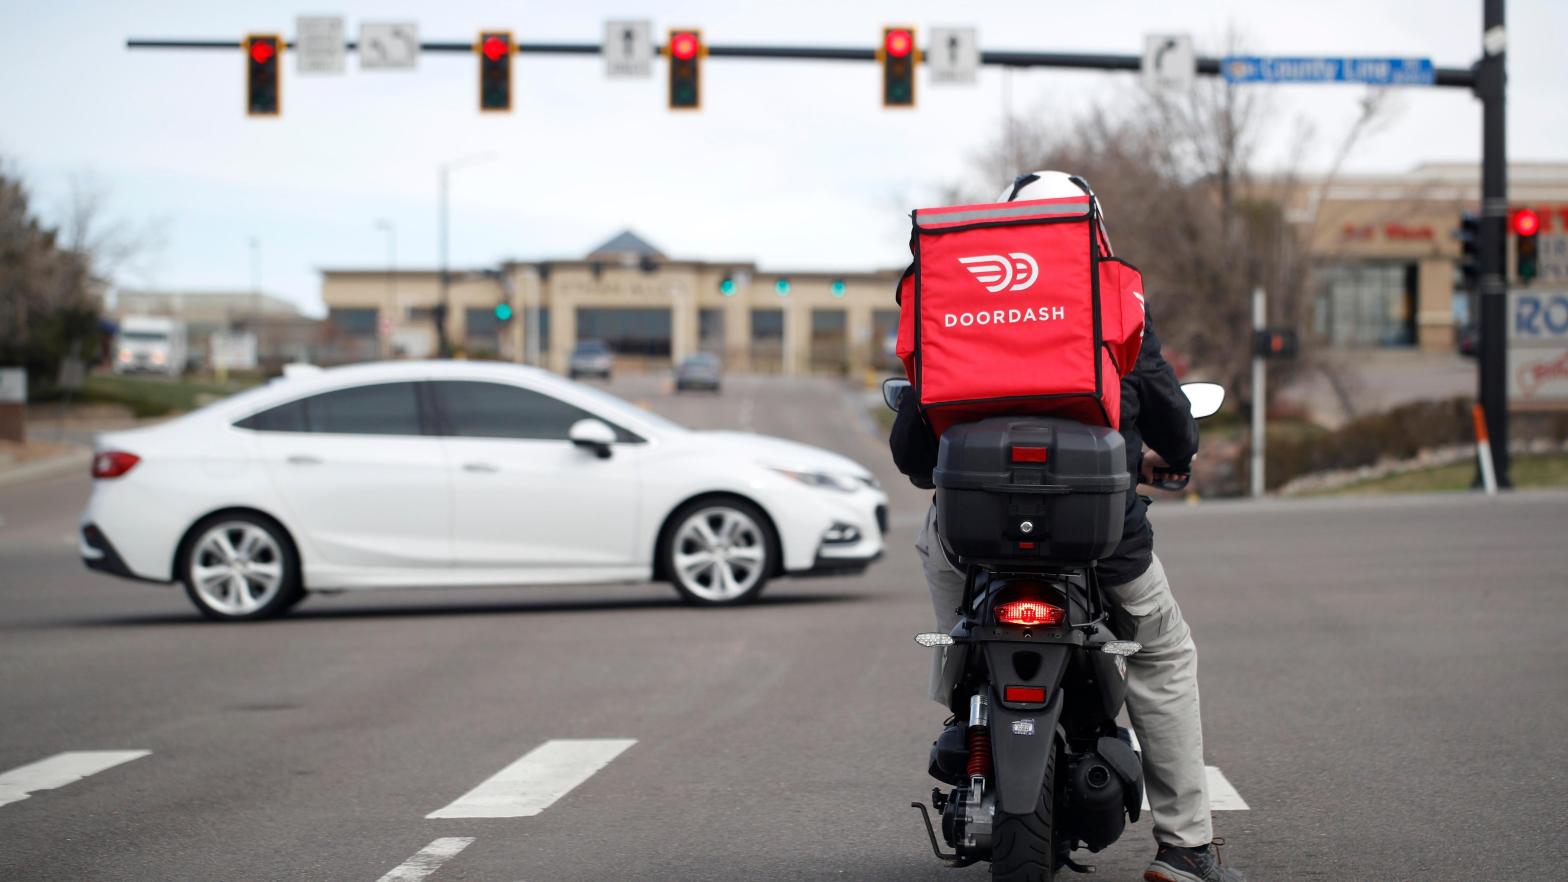 DoorDash Dashers will now have more options for getting paid, though the company said total pay from either earning per hour or per job should be comparable.  (Photo: David Zalubowski, AP)